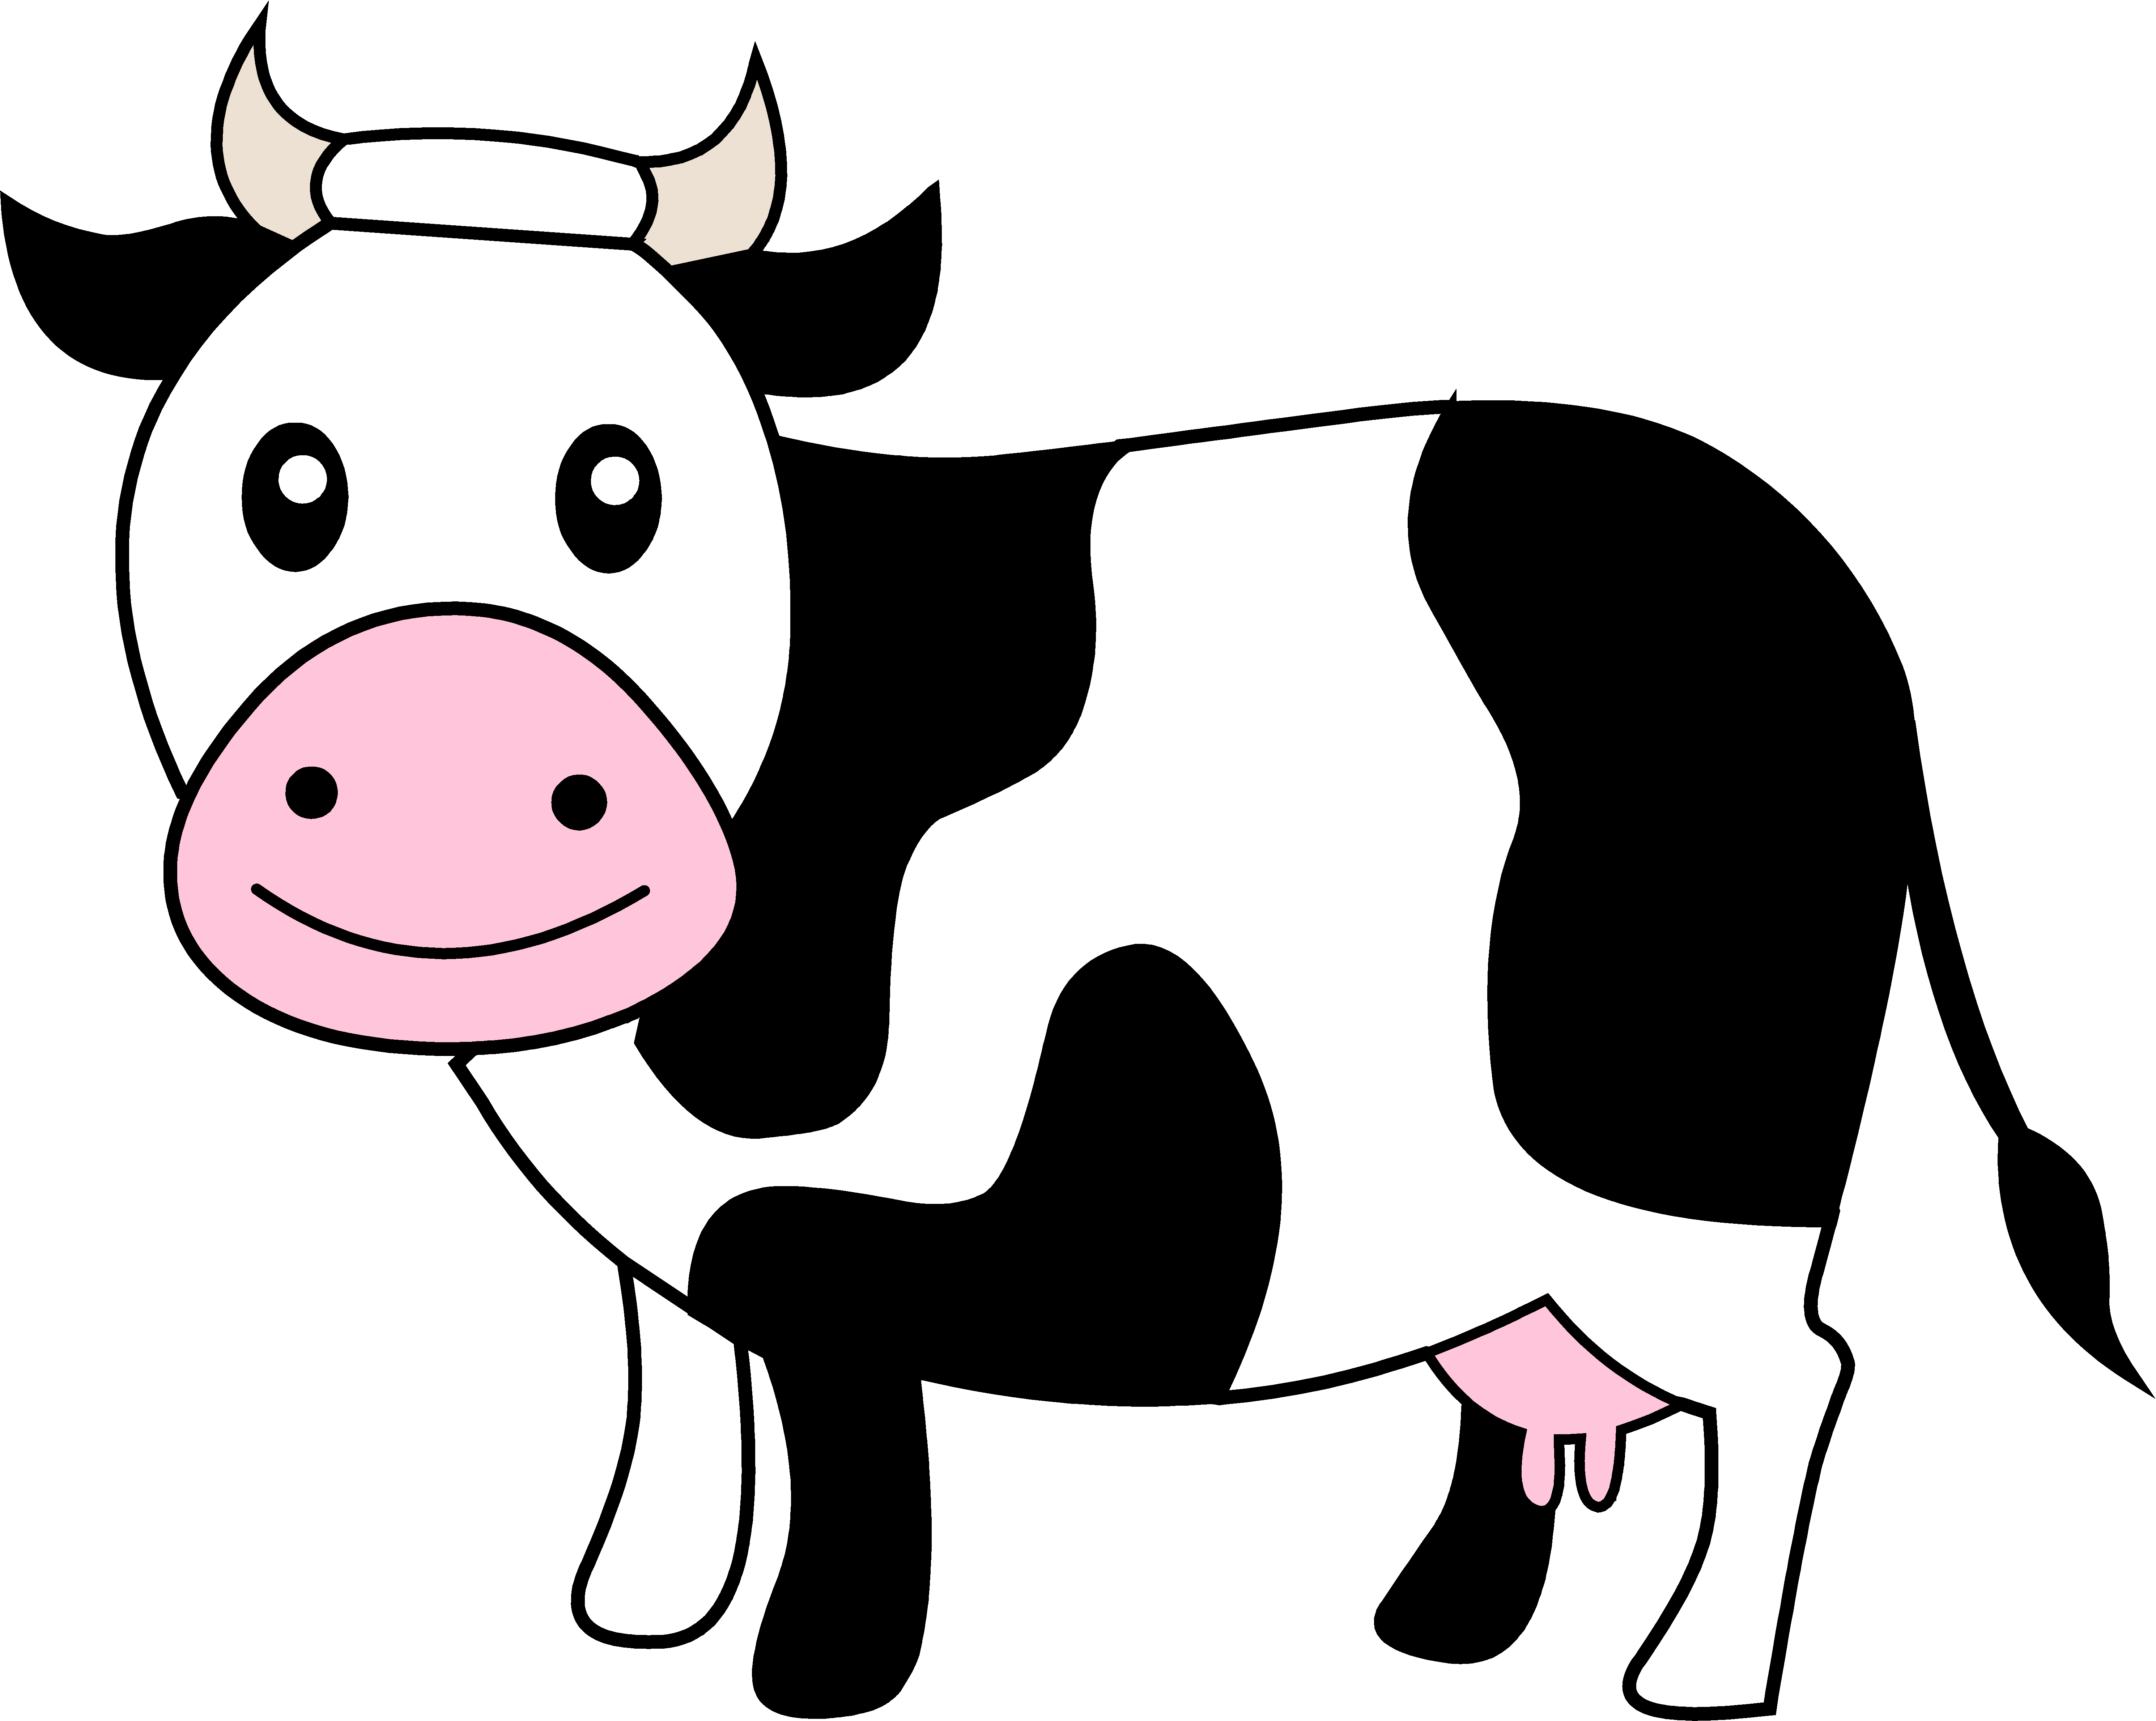 Black and White Dairy Cow - Free Clip Art